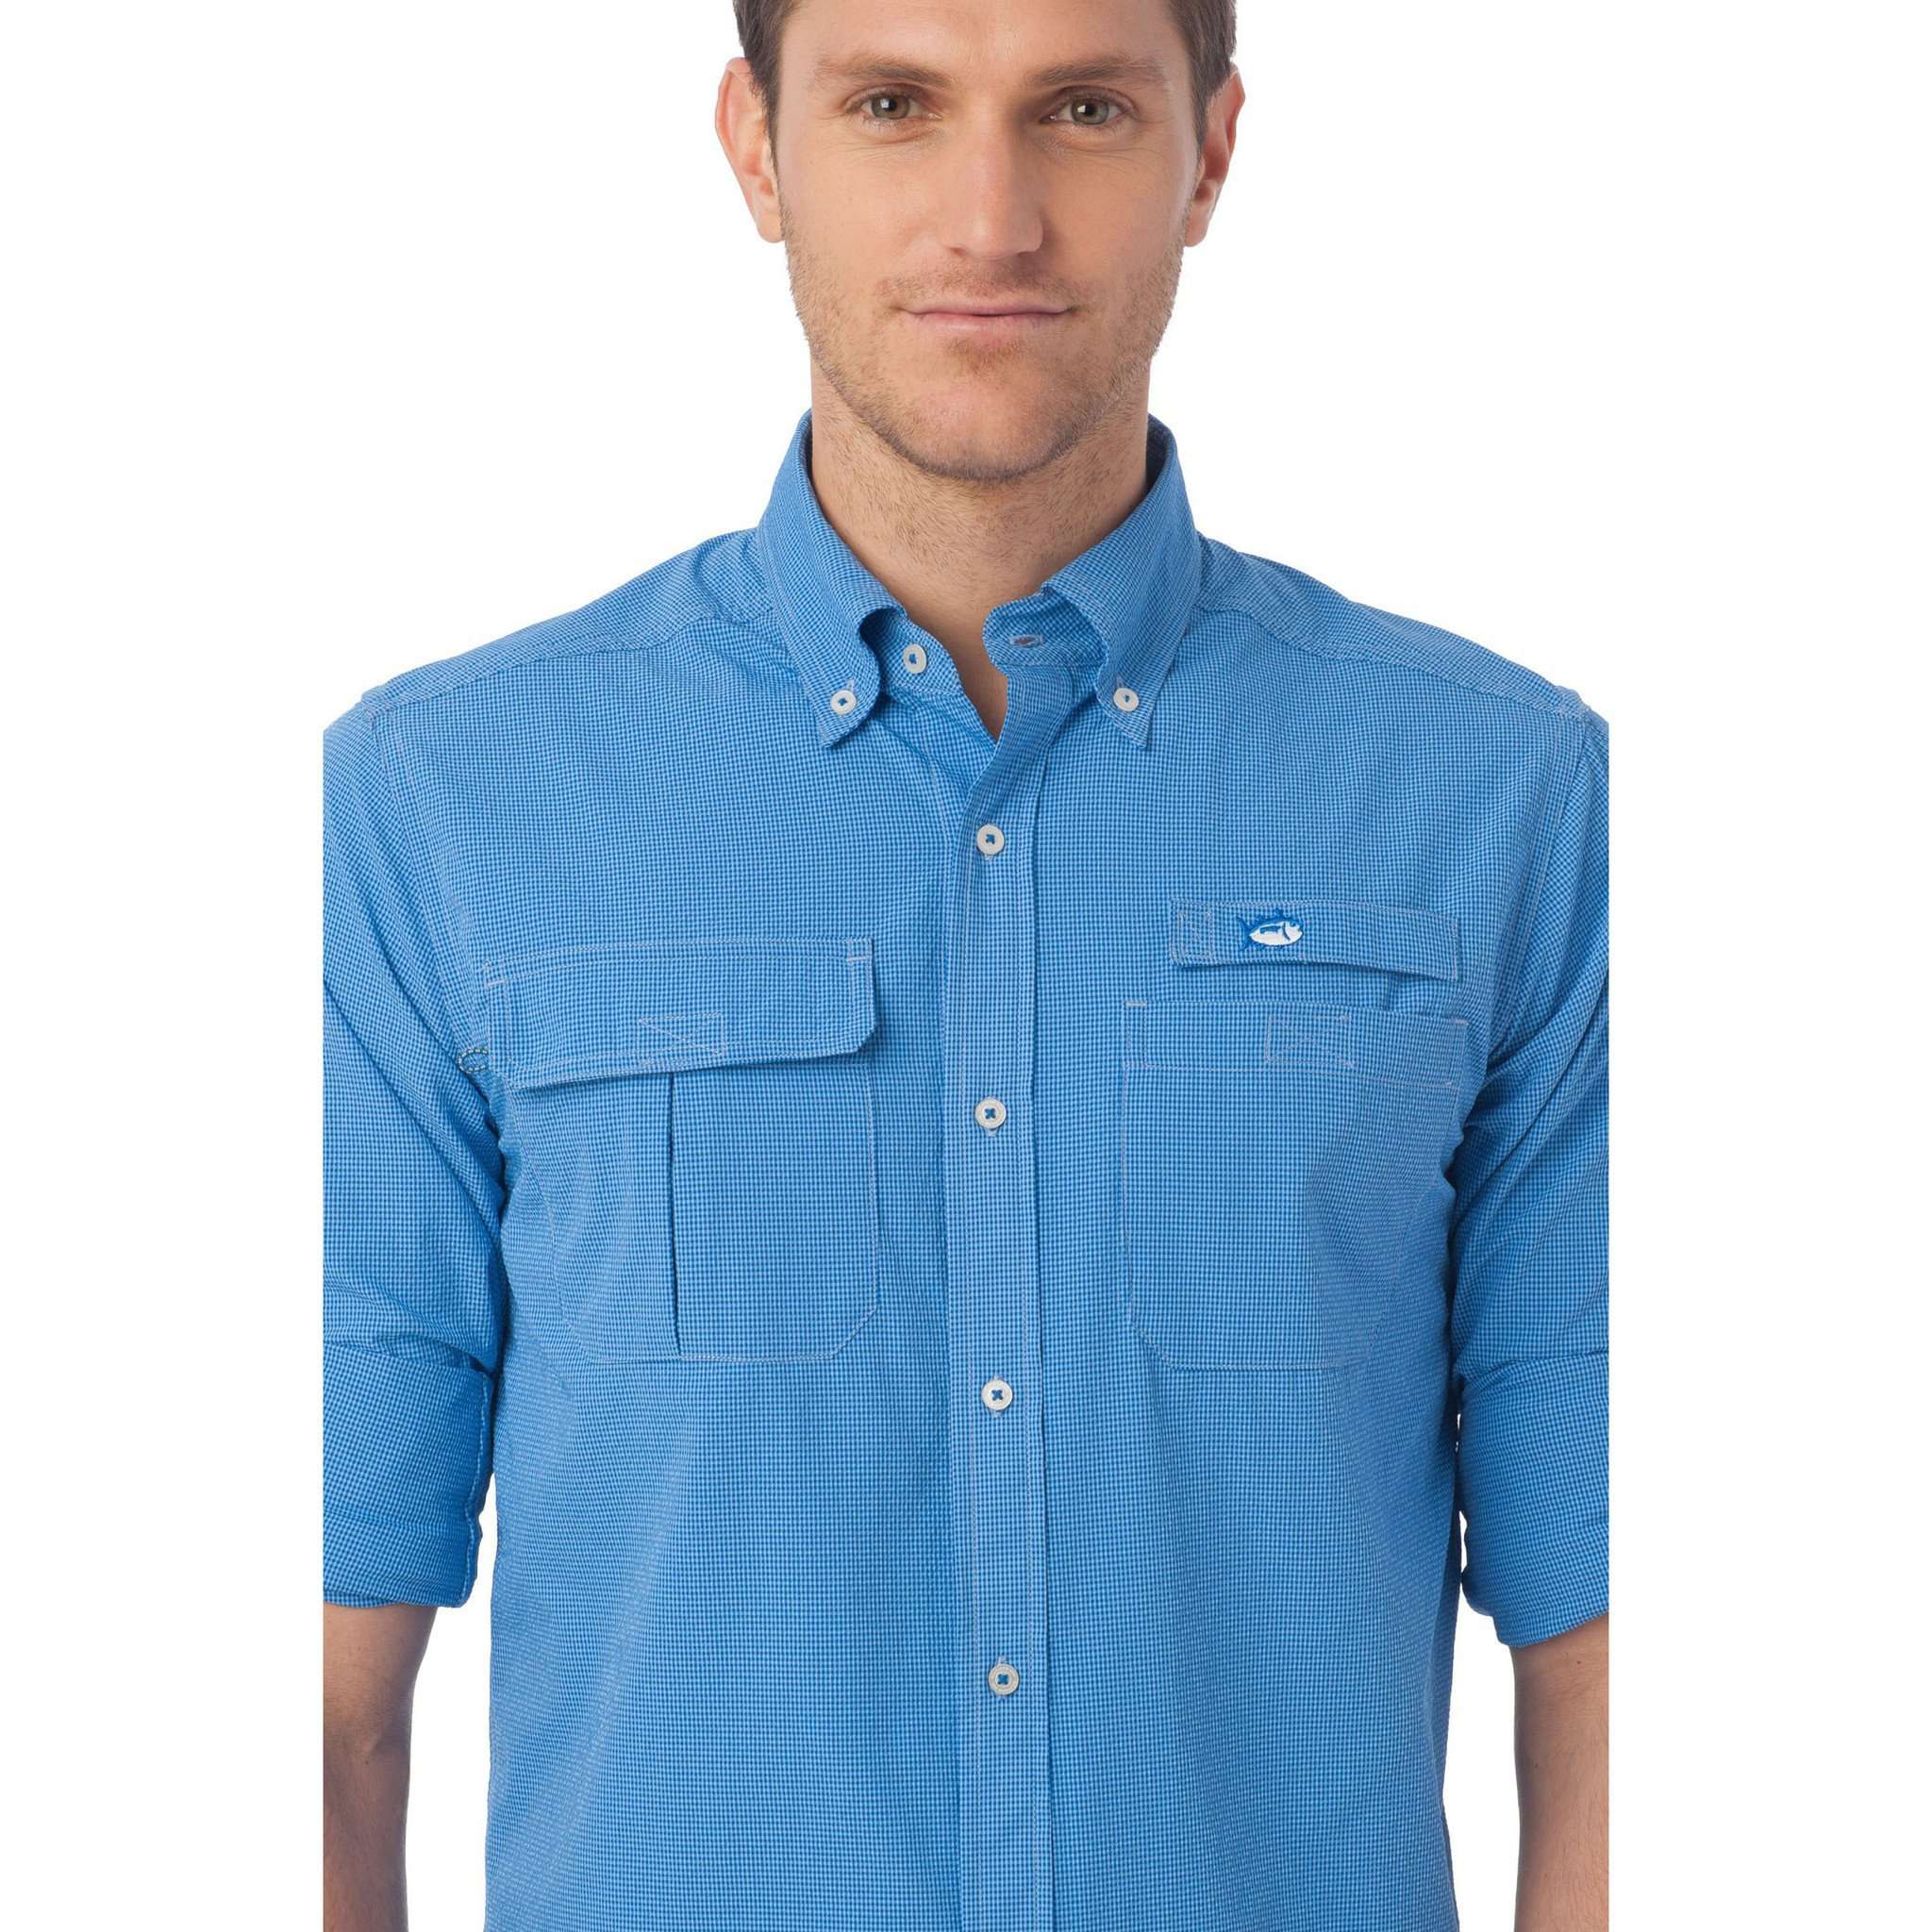 Marlin Check Fishing Shirt in Royal Blue by Southern Tide - Country Club Prep